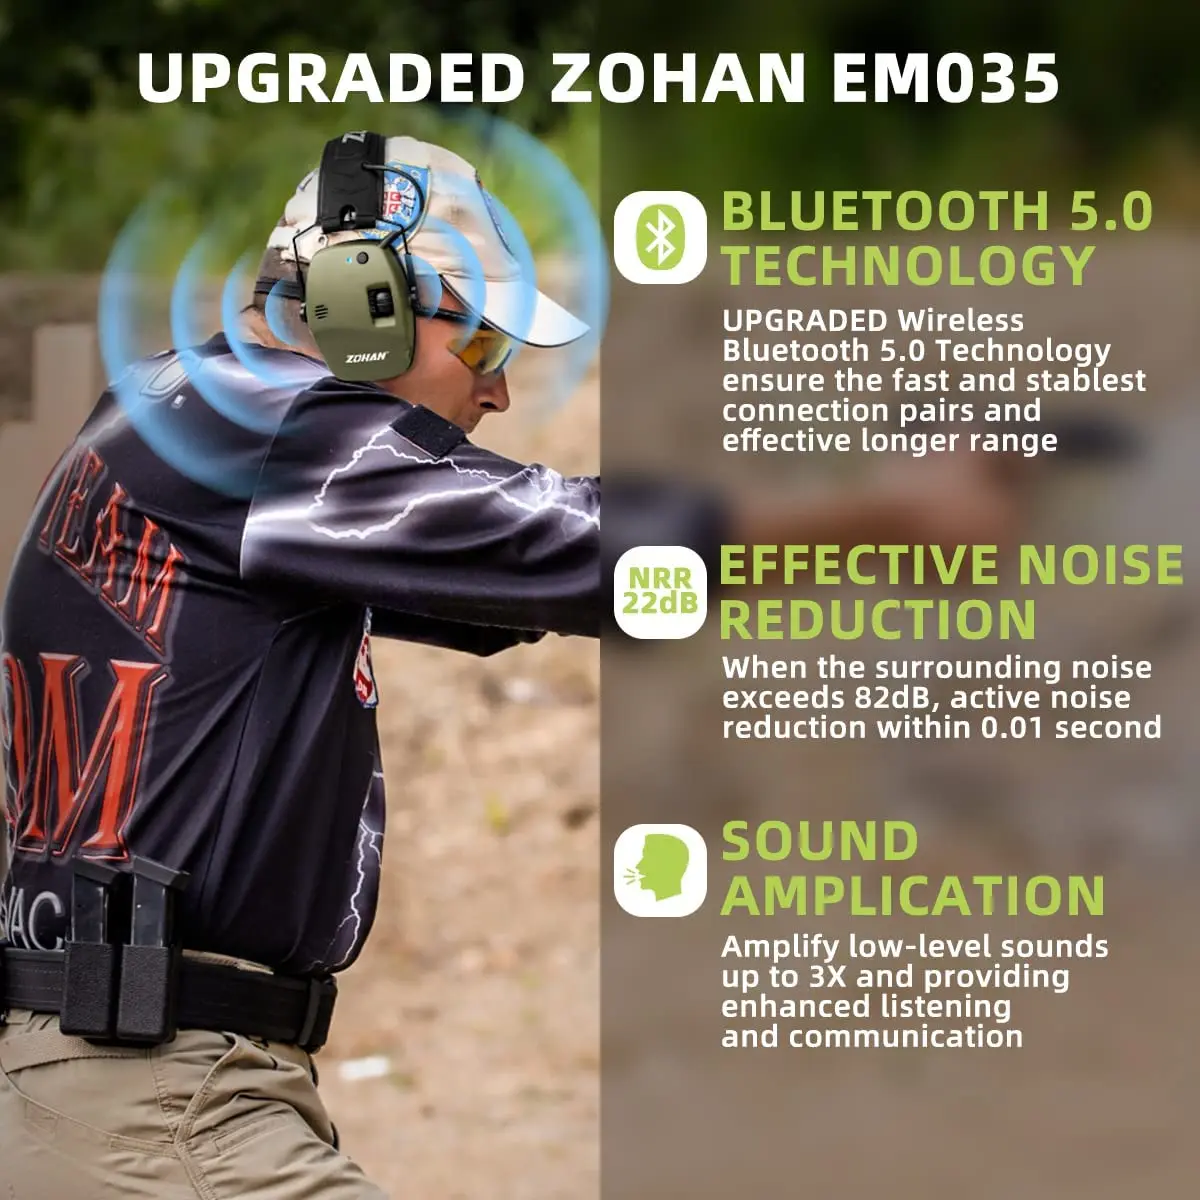 ZOHAN Electronic Earmuffs Bluetooth 5.0 Shooting Ear Protection Active Noise Canceling Protection for Hunting Hearing NRR22dB